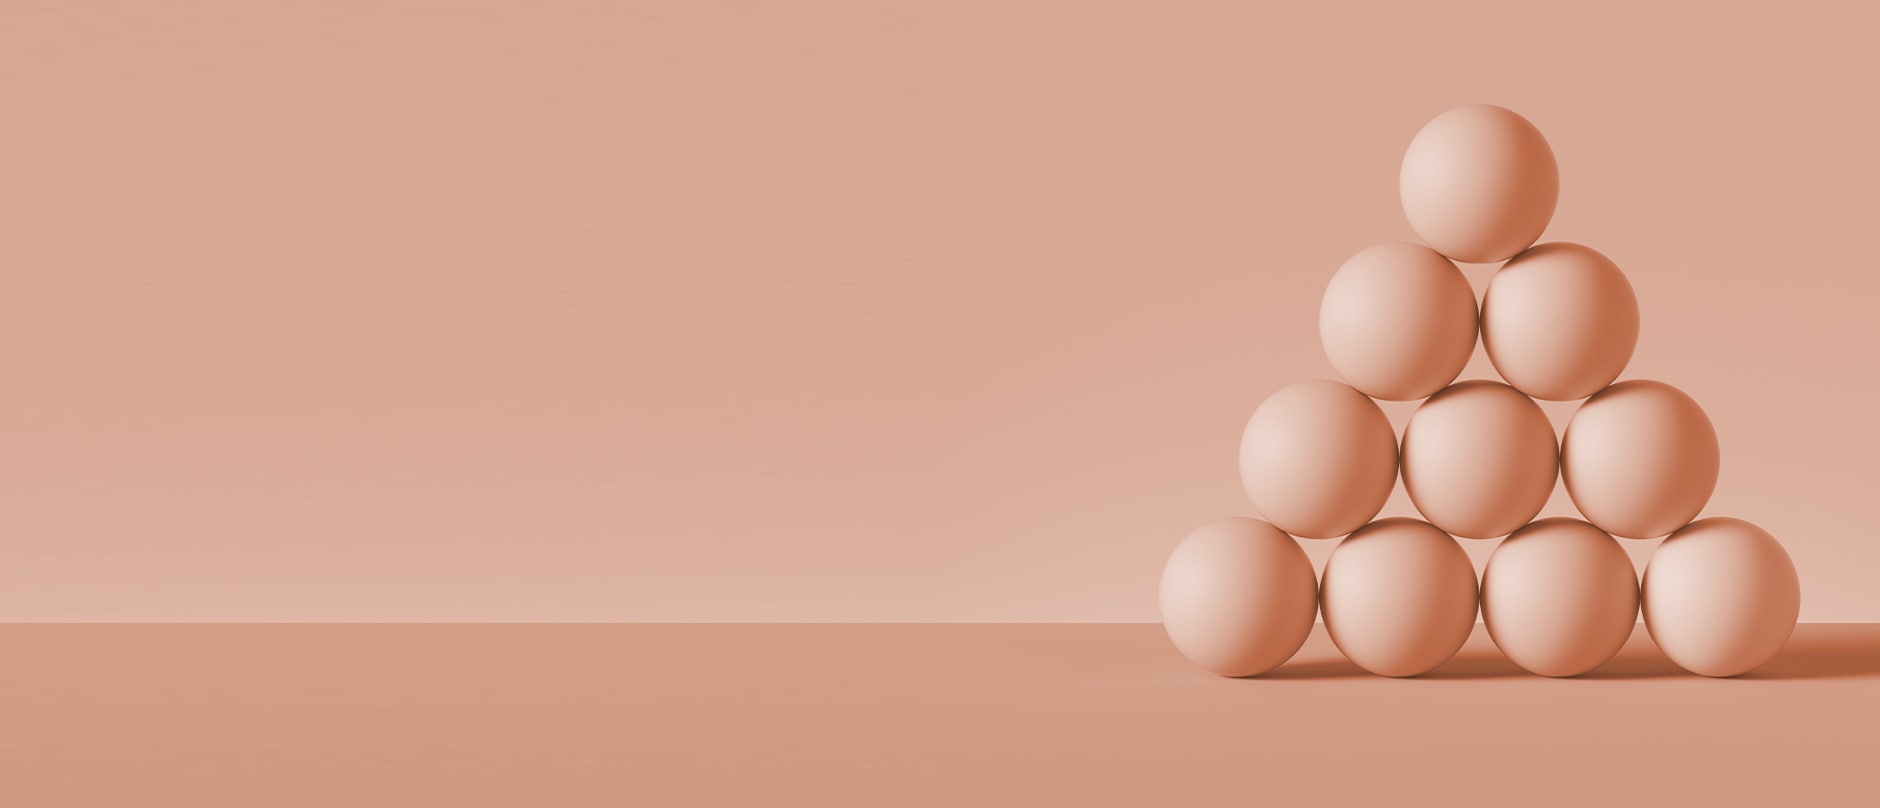 10 peach spheres arranged in a pyramid with peach background